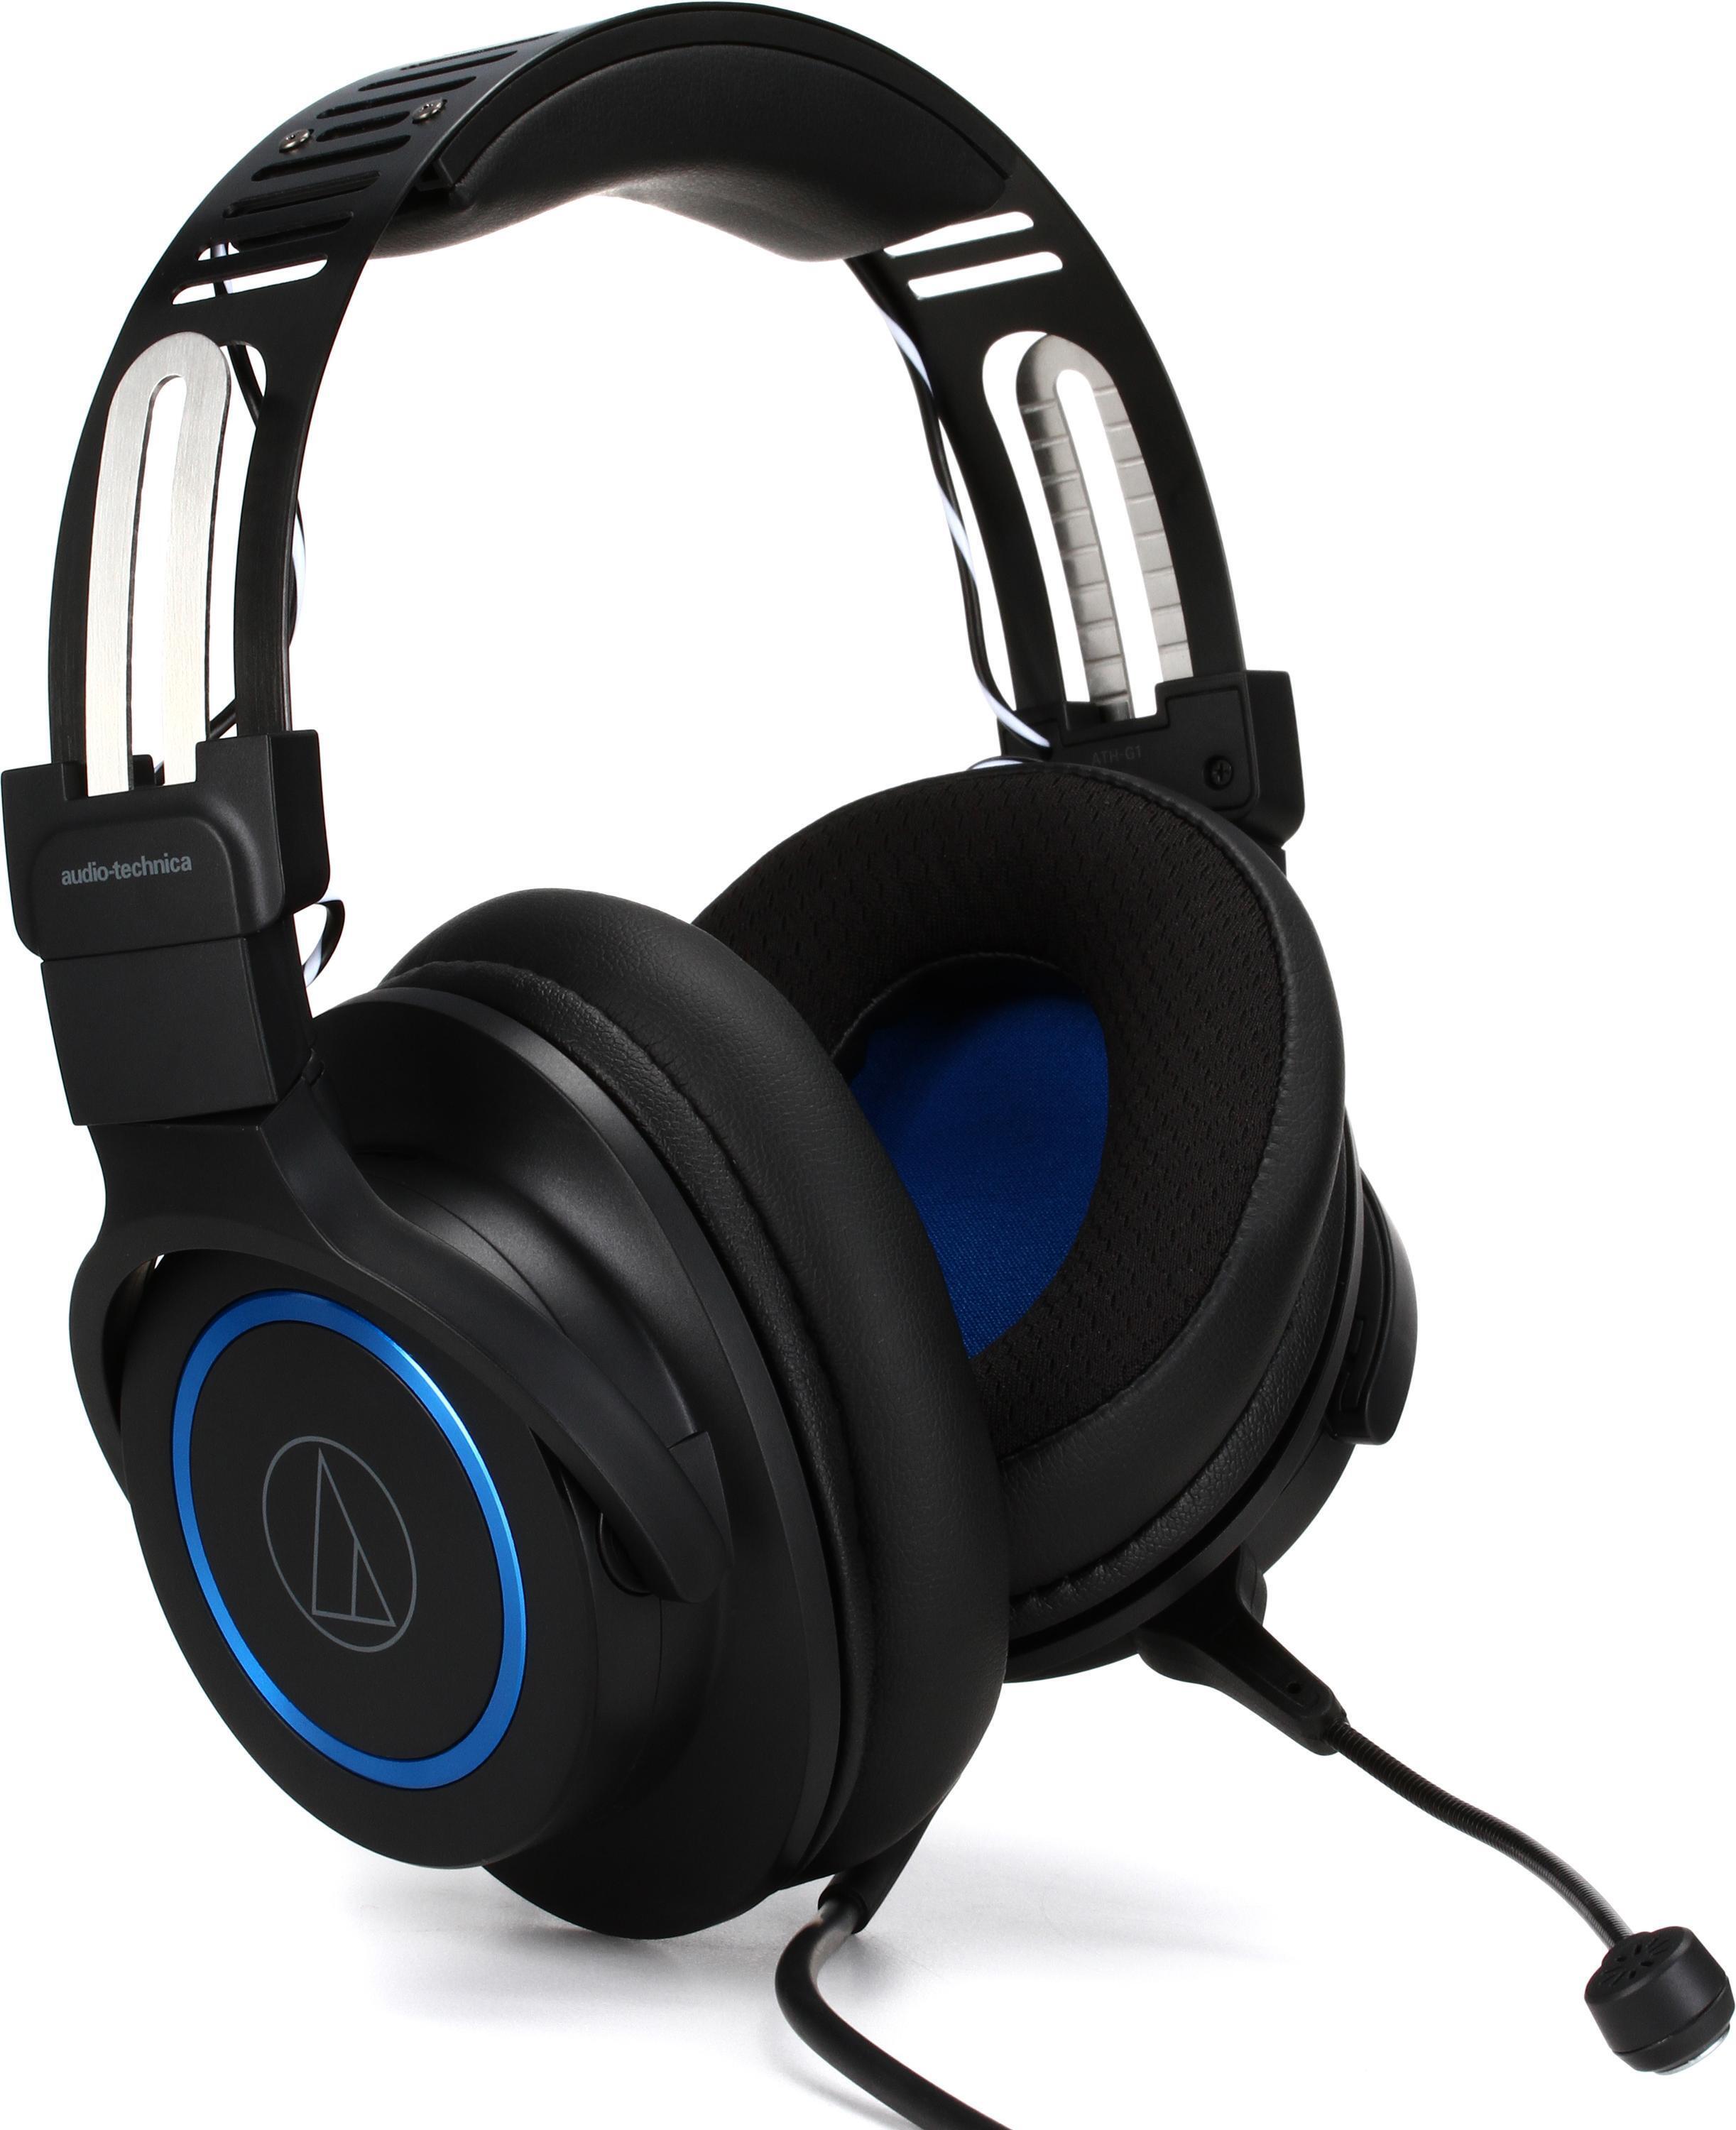 ATH-G1 Premium Headset with Detachable Mic, 3.5mm TRRS Connector